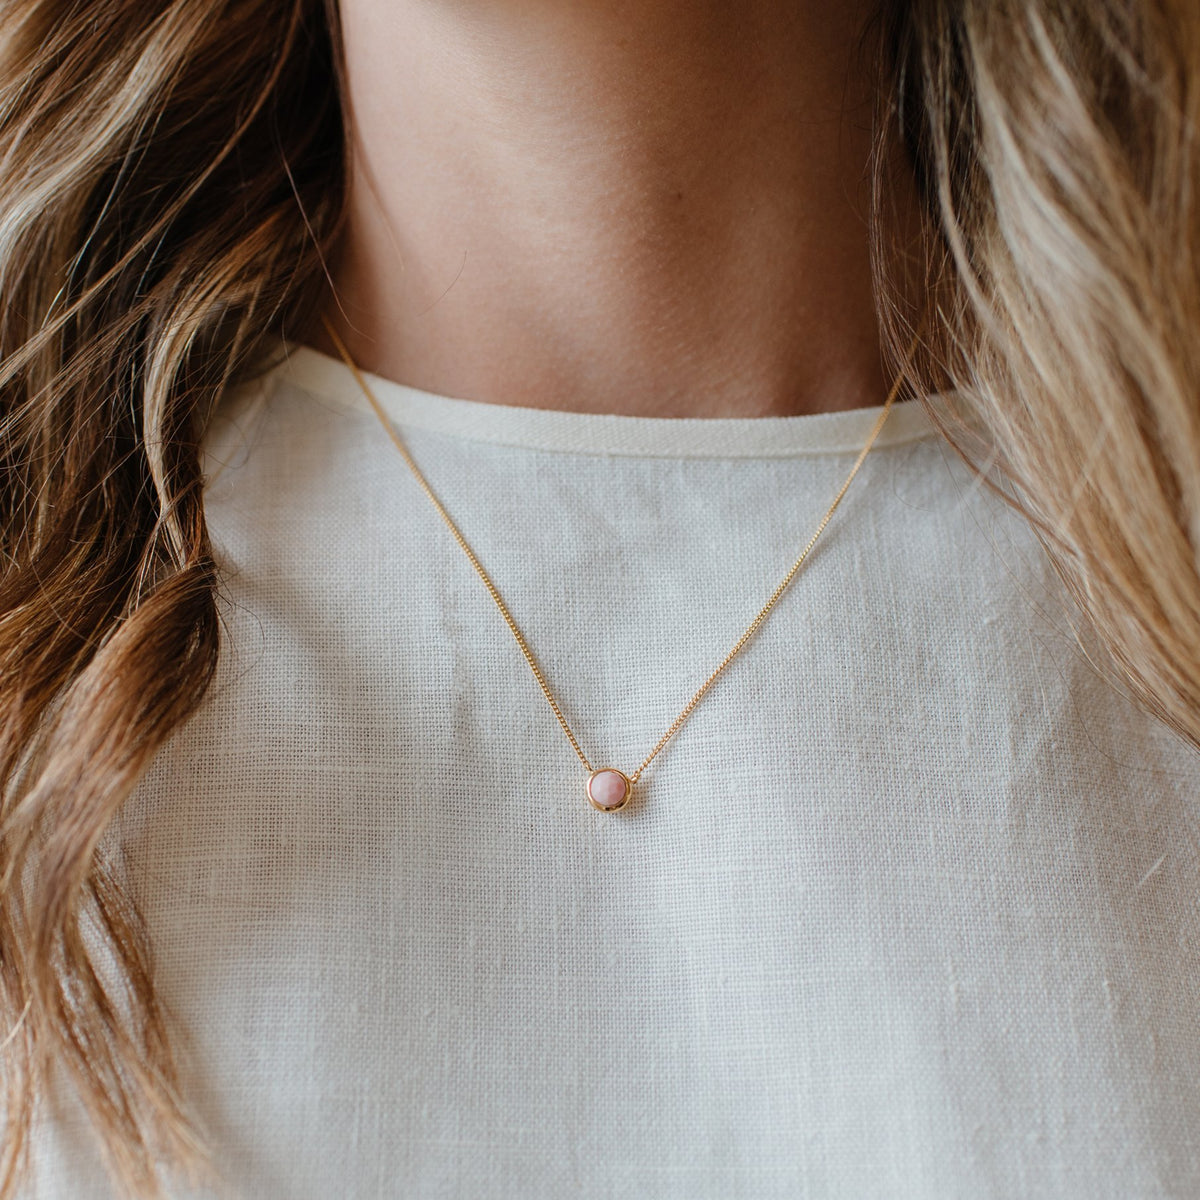 DAINTY LEGACY NECKLACE - PINK OPAL &amp; GOLD - SO PRETTY CARA COTTER